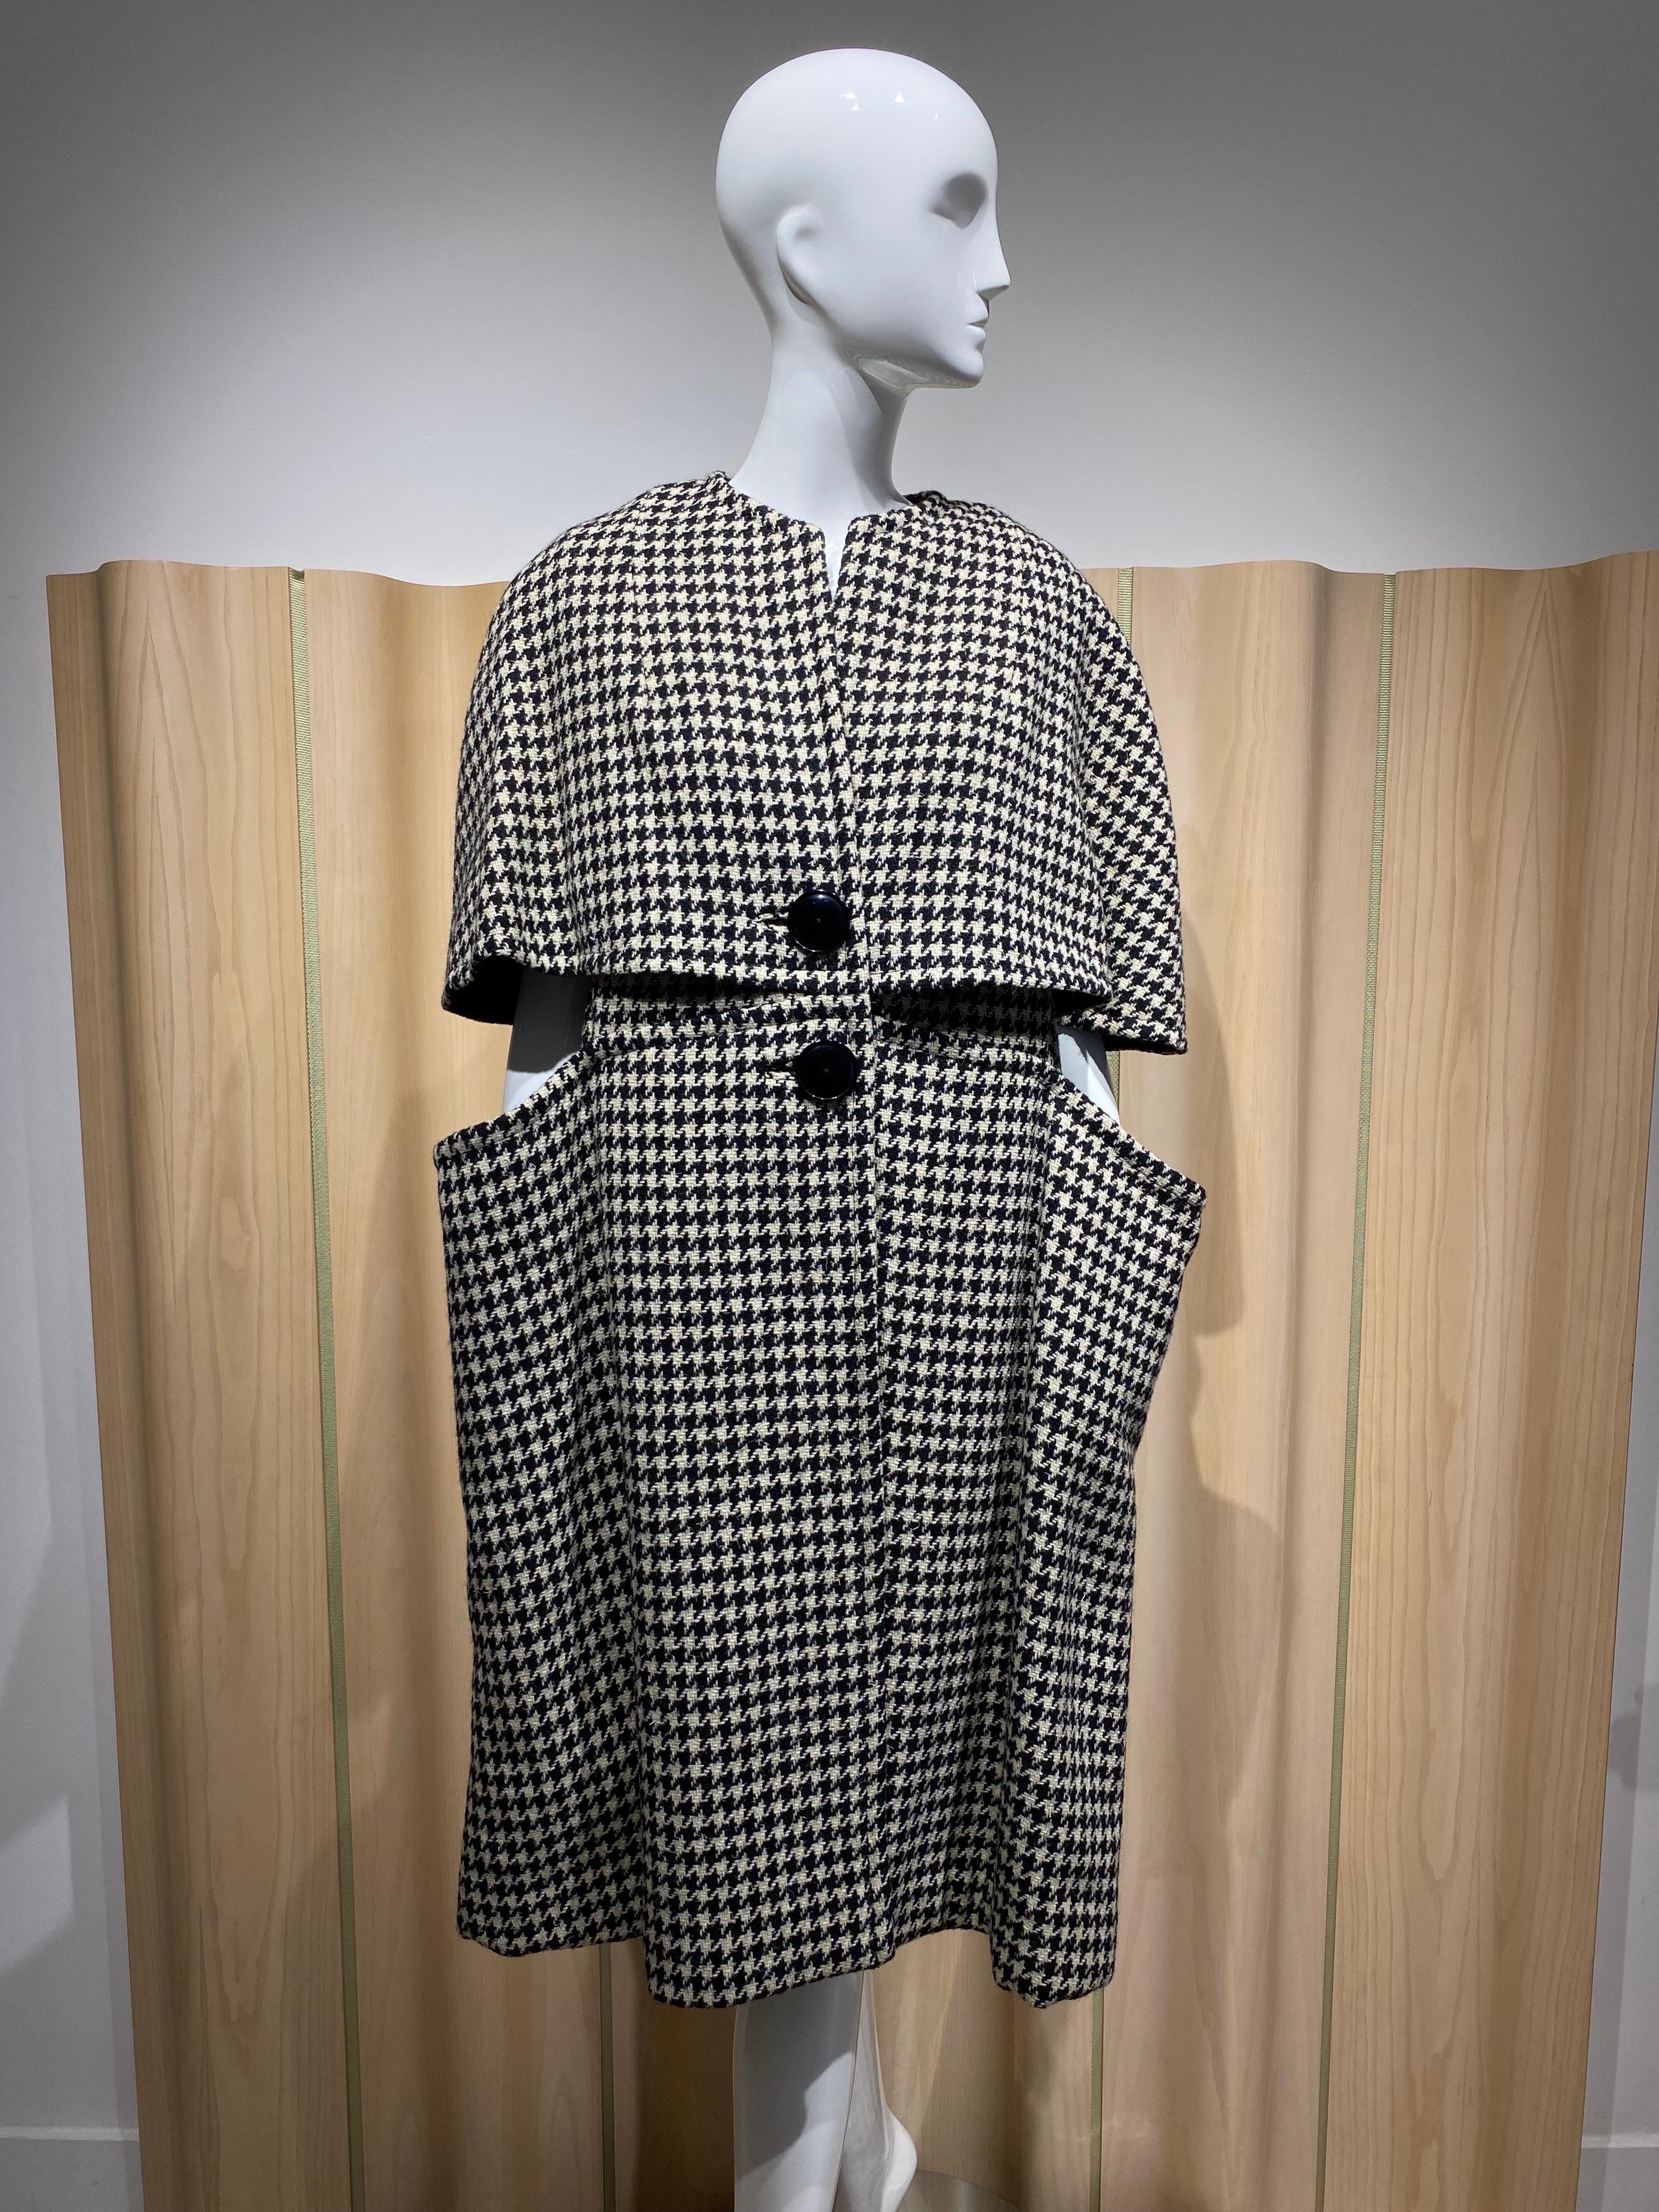 Early 60s Rudi Gernreich houndstooth wool cape coat with Large Pocket.
Fit size 10